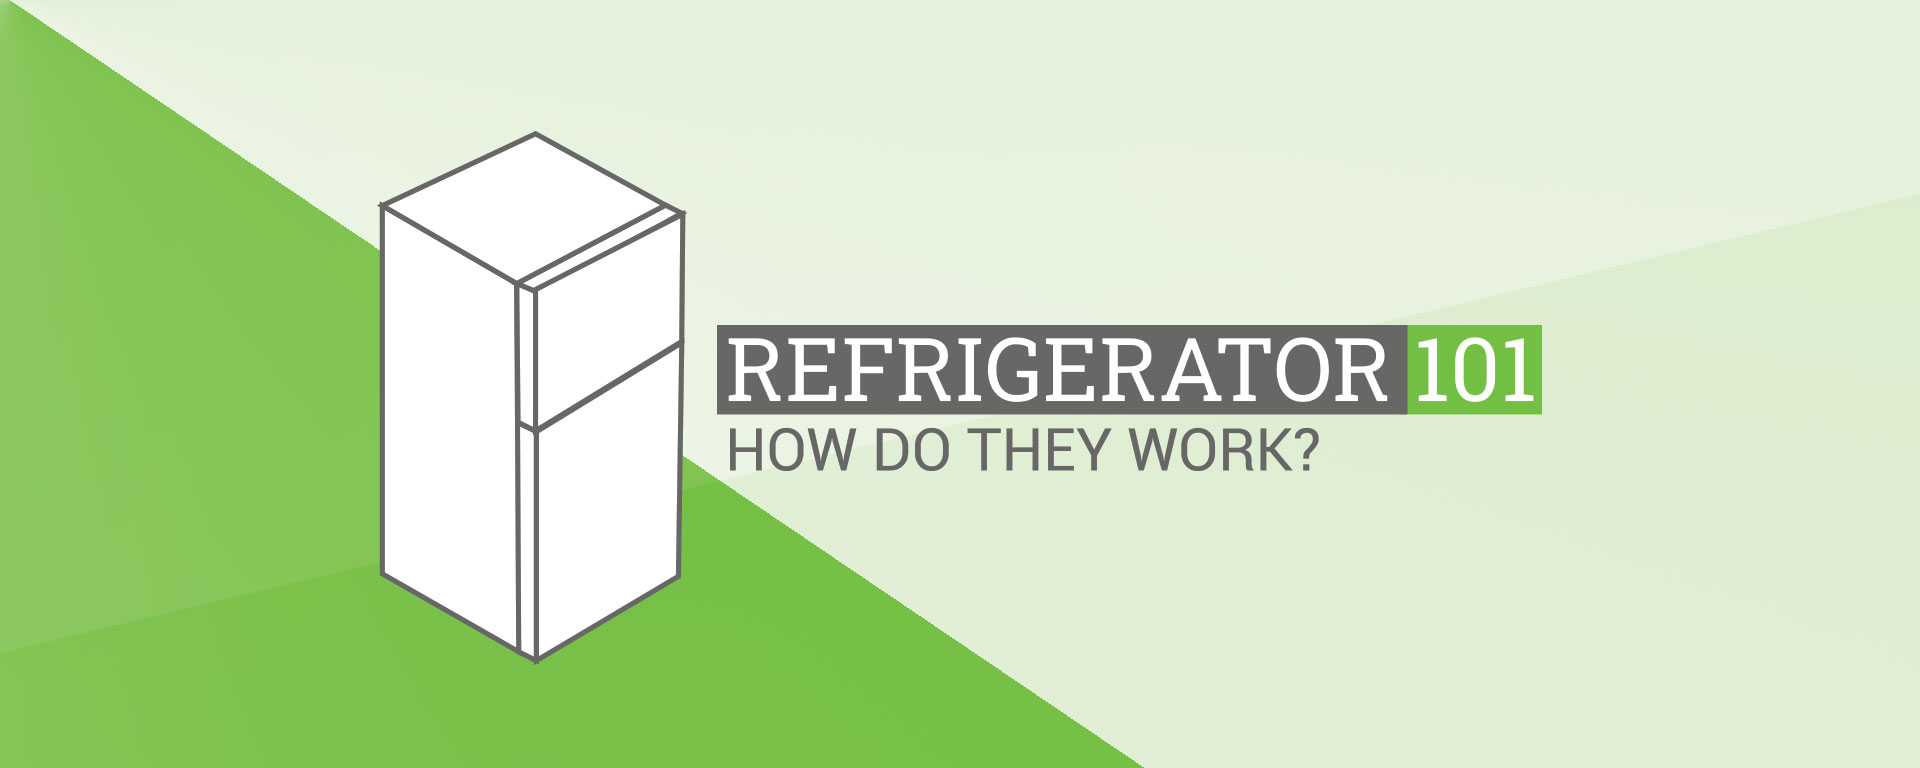 How does a refrigerator work?